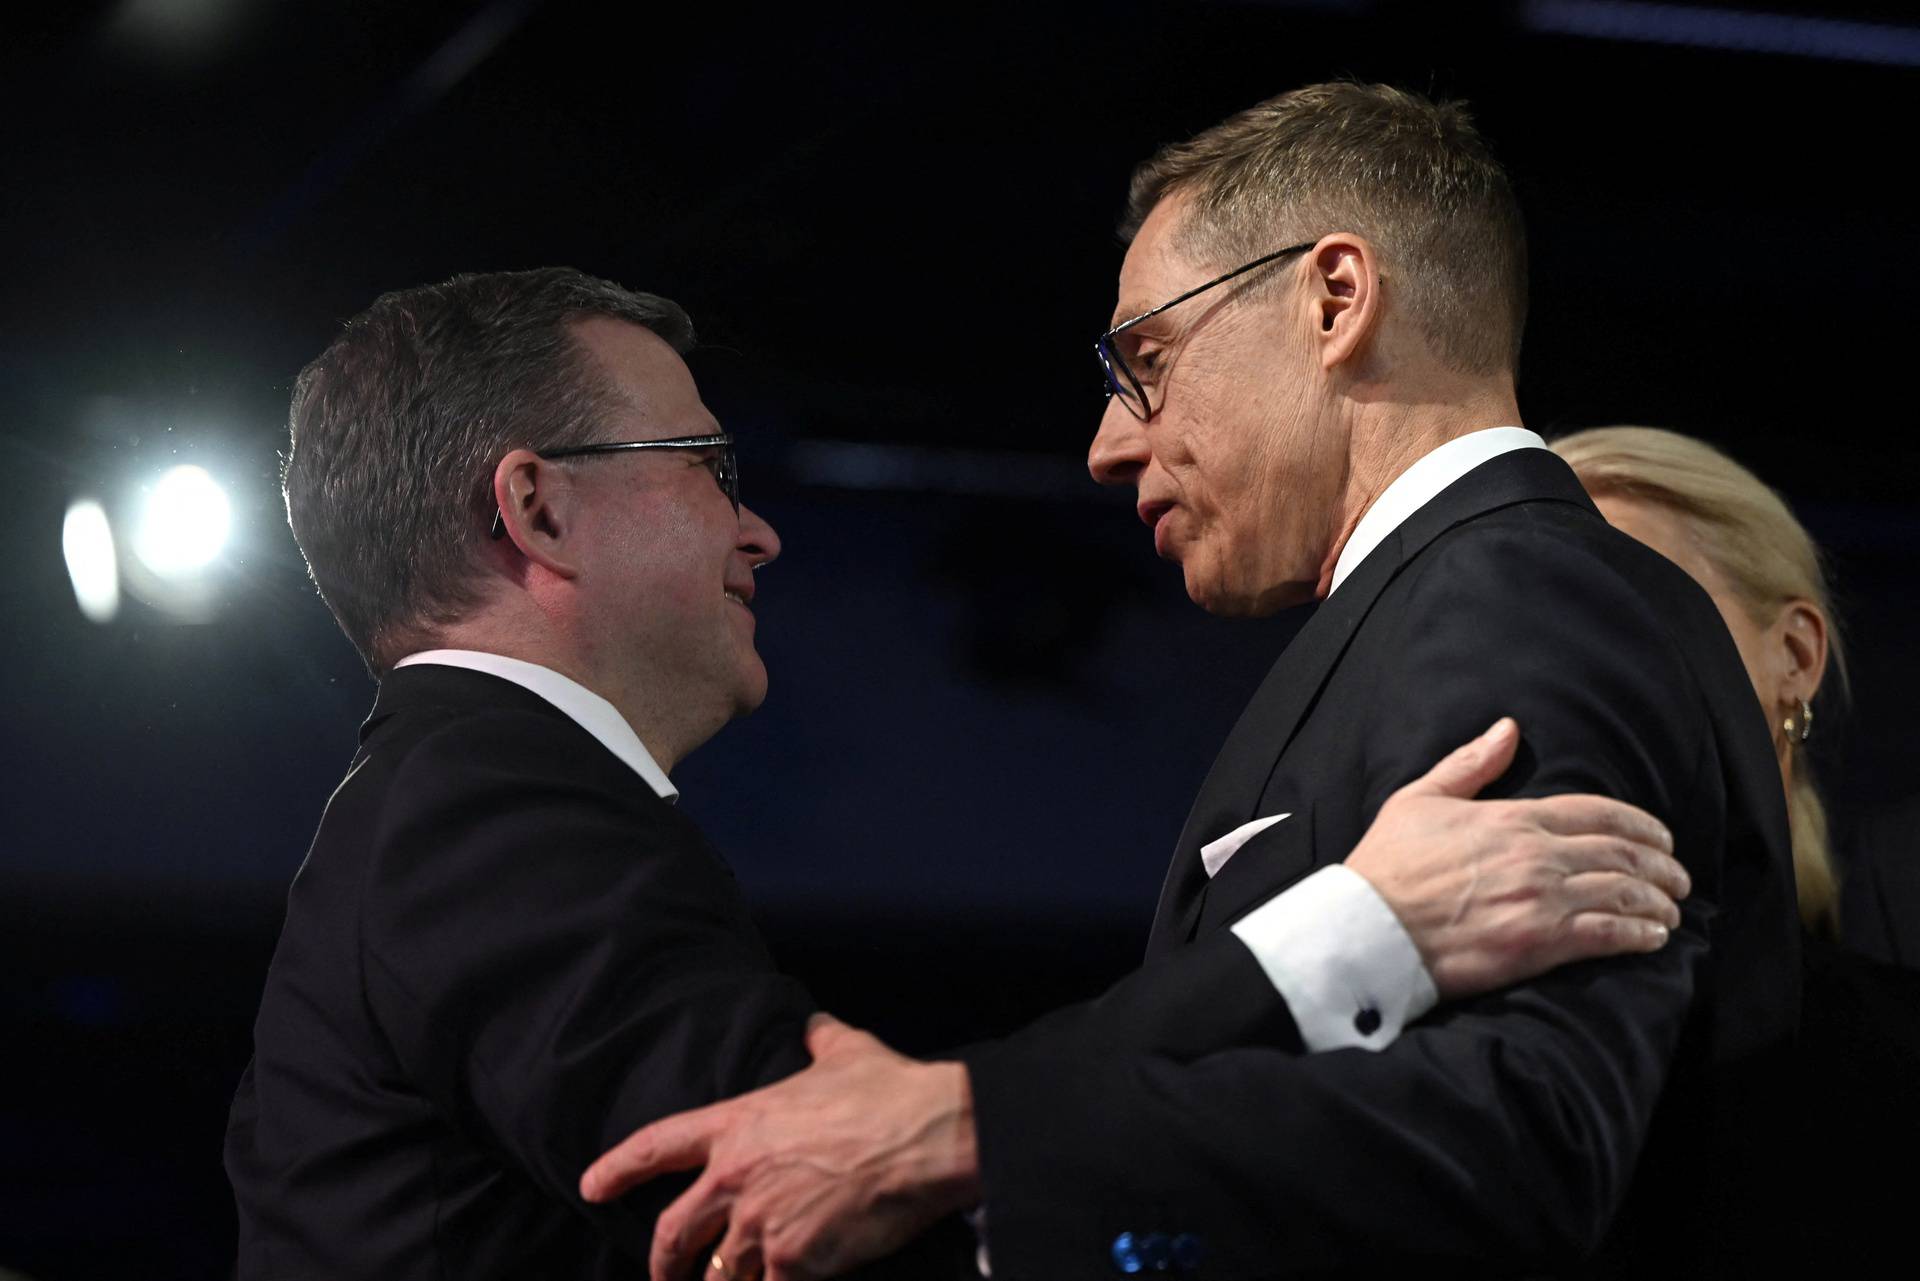 Election reception of NCP presidential candidate Alexander Stubb in Helsinki